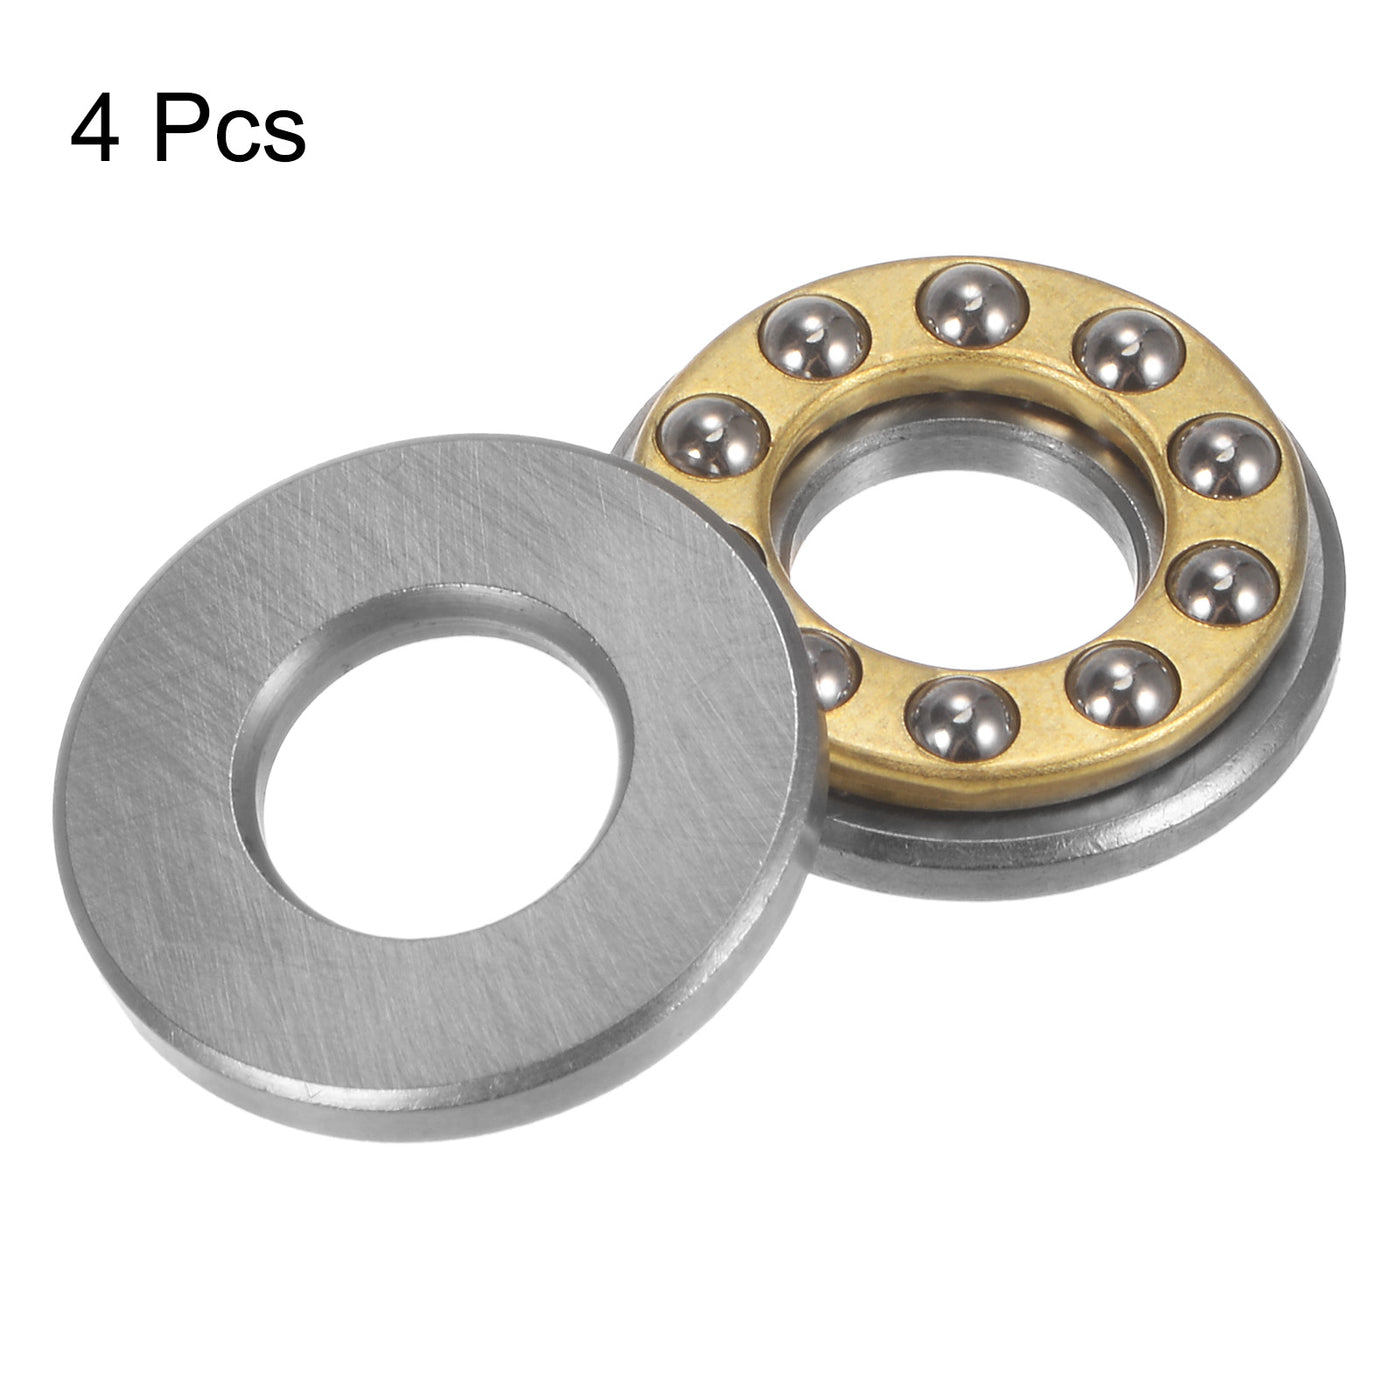 uxcell Uxcell F9-20M Thrust Ball Bearing 9x20x7mm Brass with Washers ABEC3 4pcs